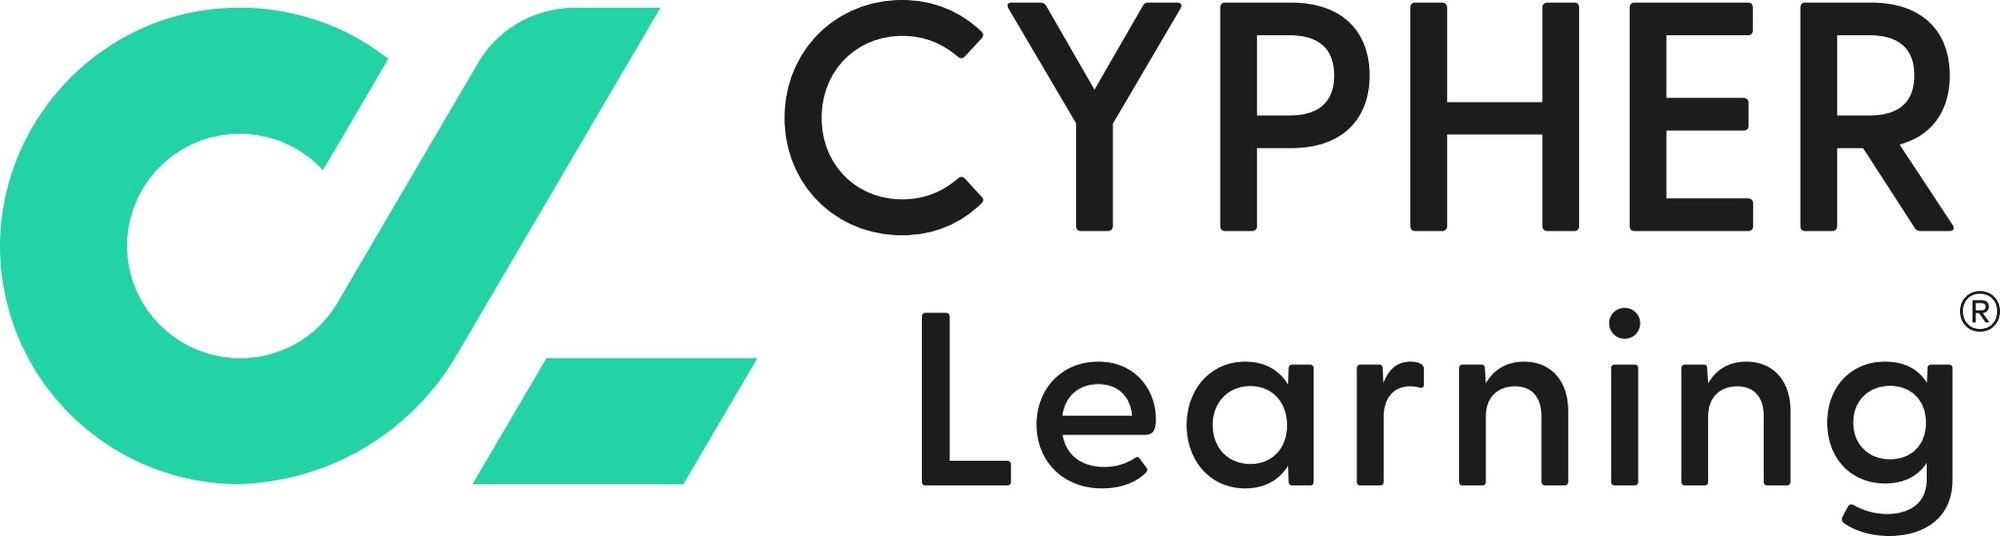 Cypher Learning logo